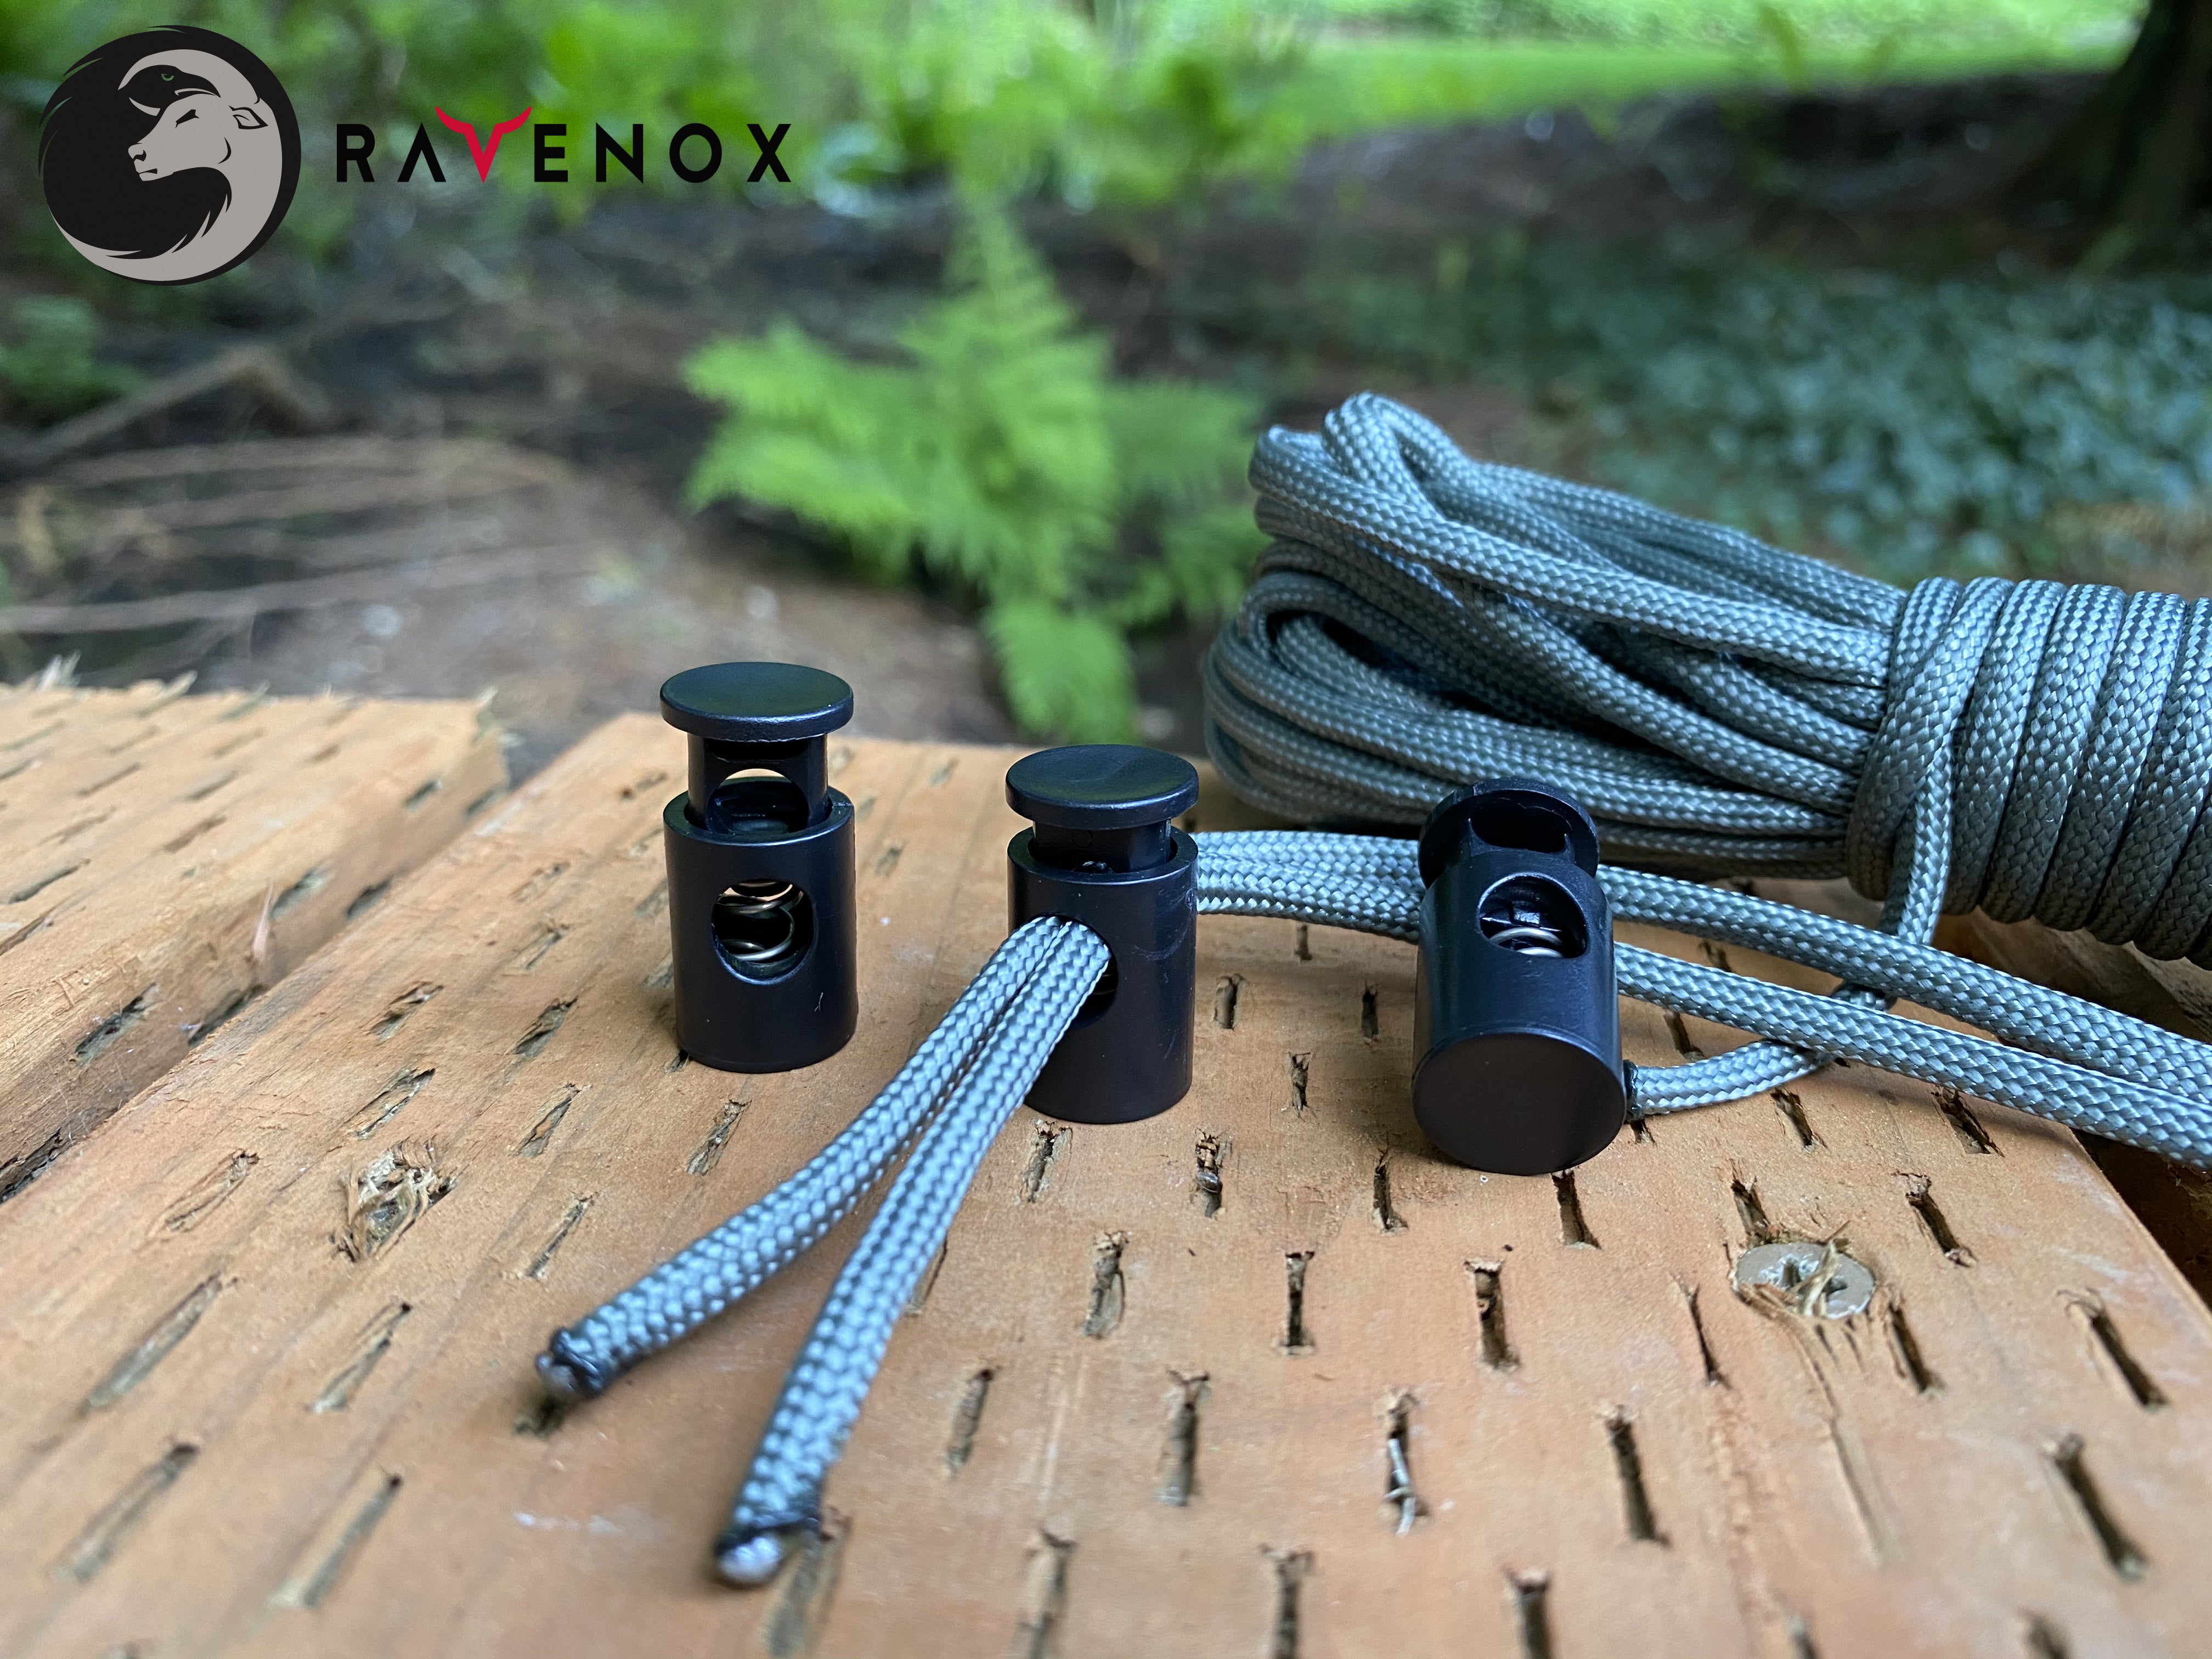 Ravenox Cord Locks For Paracord | CSL Center Release Sliploc | Cord Stops  For Bags, Luggage, Shoes, Rope, Twine, and Clothing Use | Camping